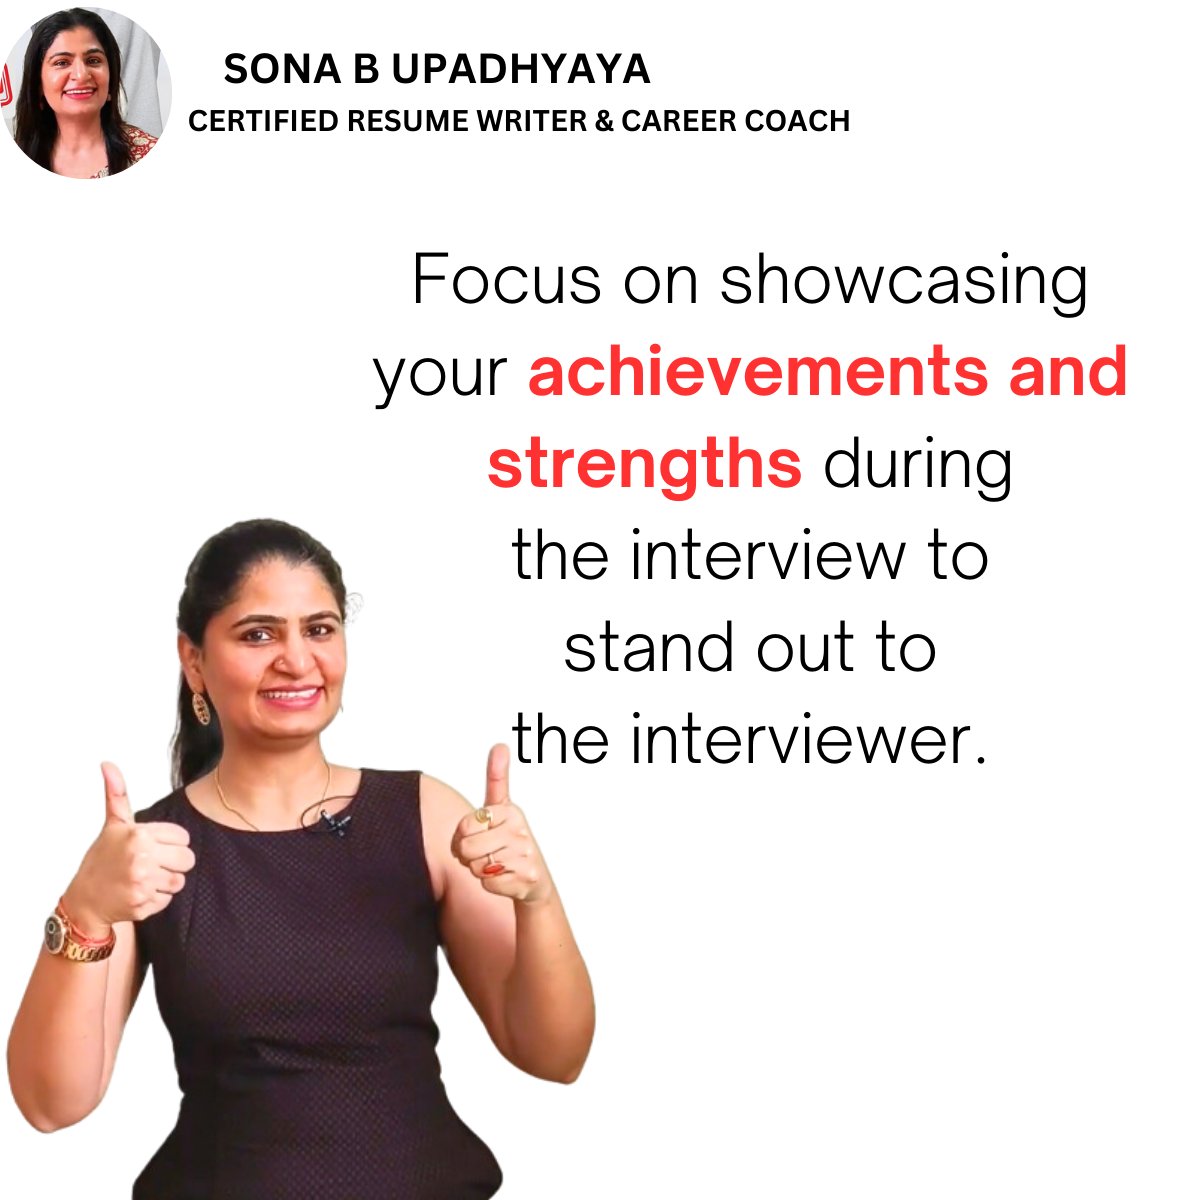 During your interview, make sure to talk about the things you've done well and what you're good at. It's like telling your success story. Share times when you did a great job, projects you're proud of, and challenges you've overcome. #interview #jobsearch